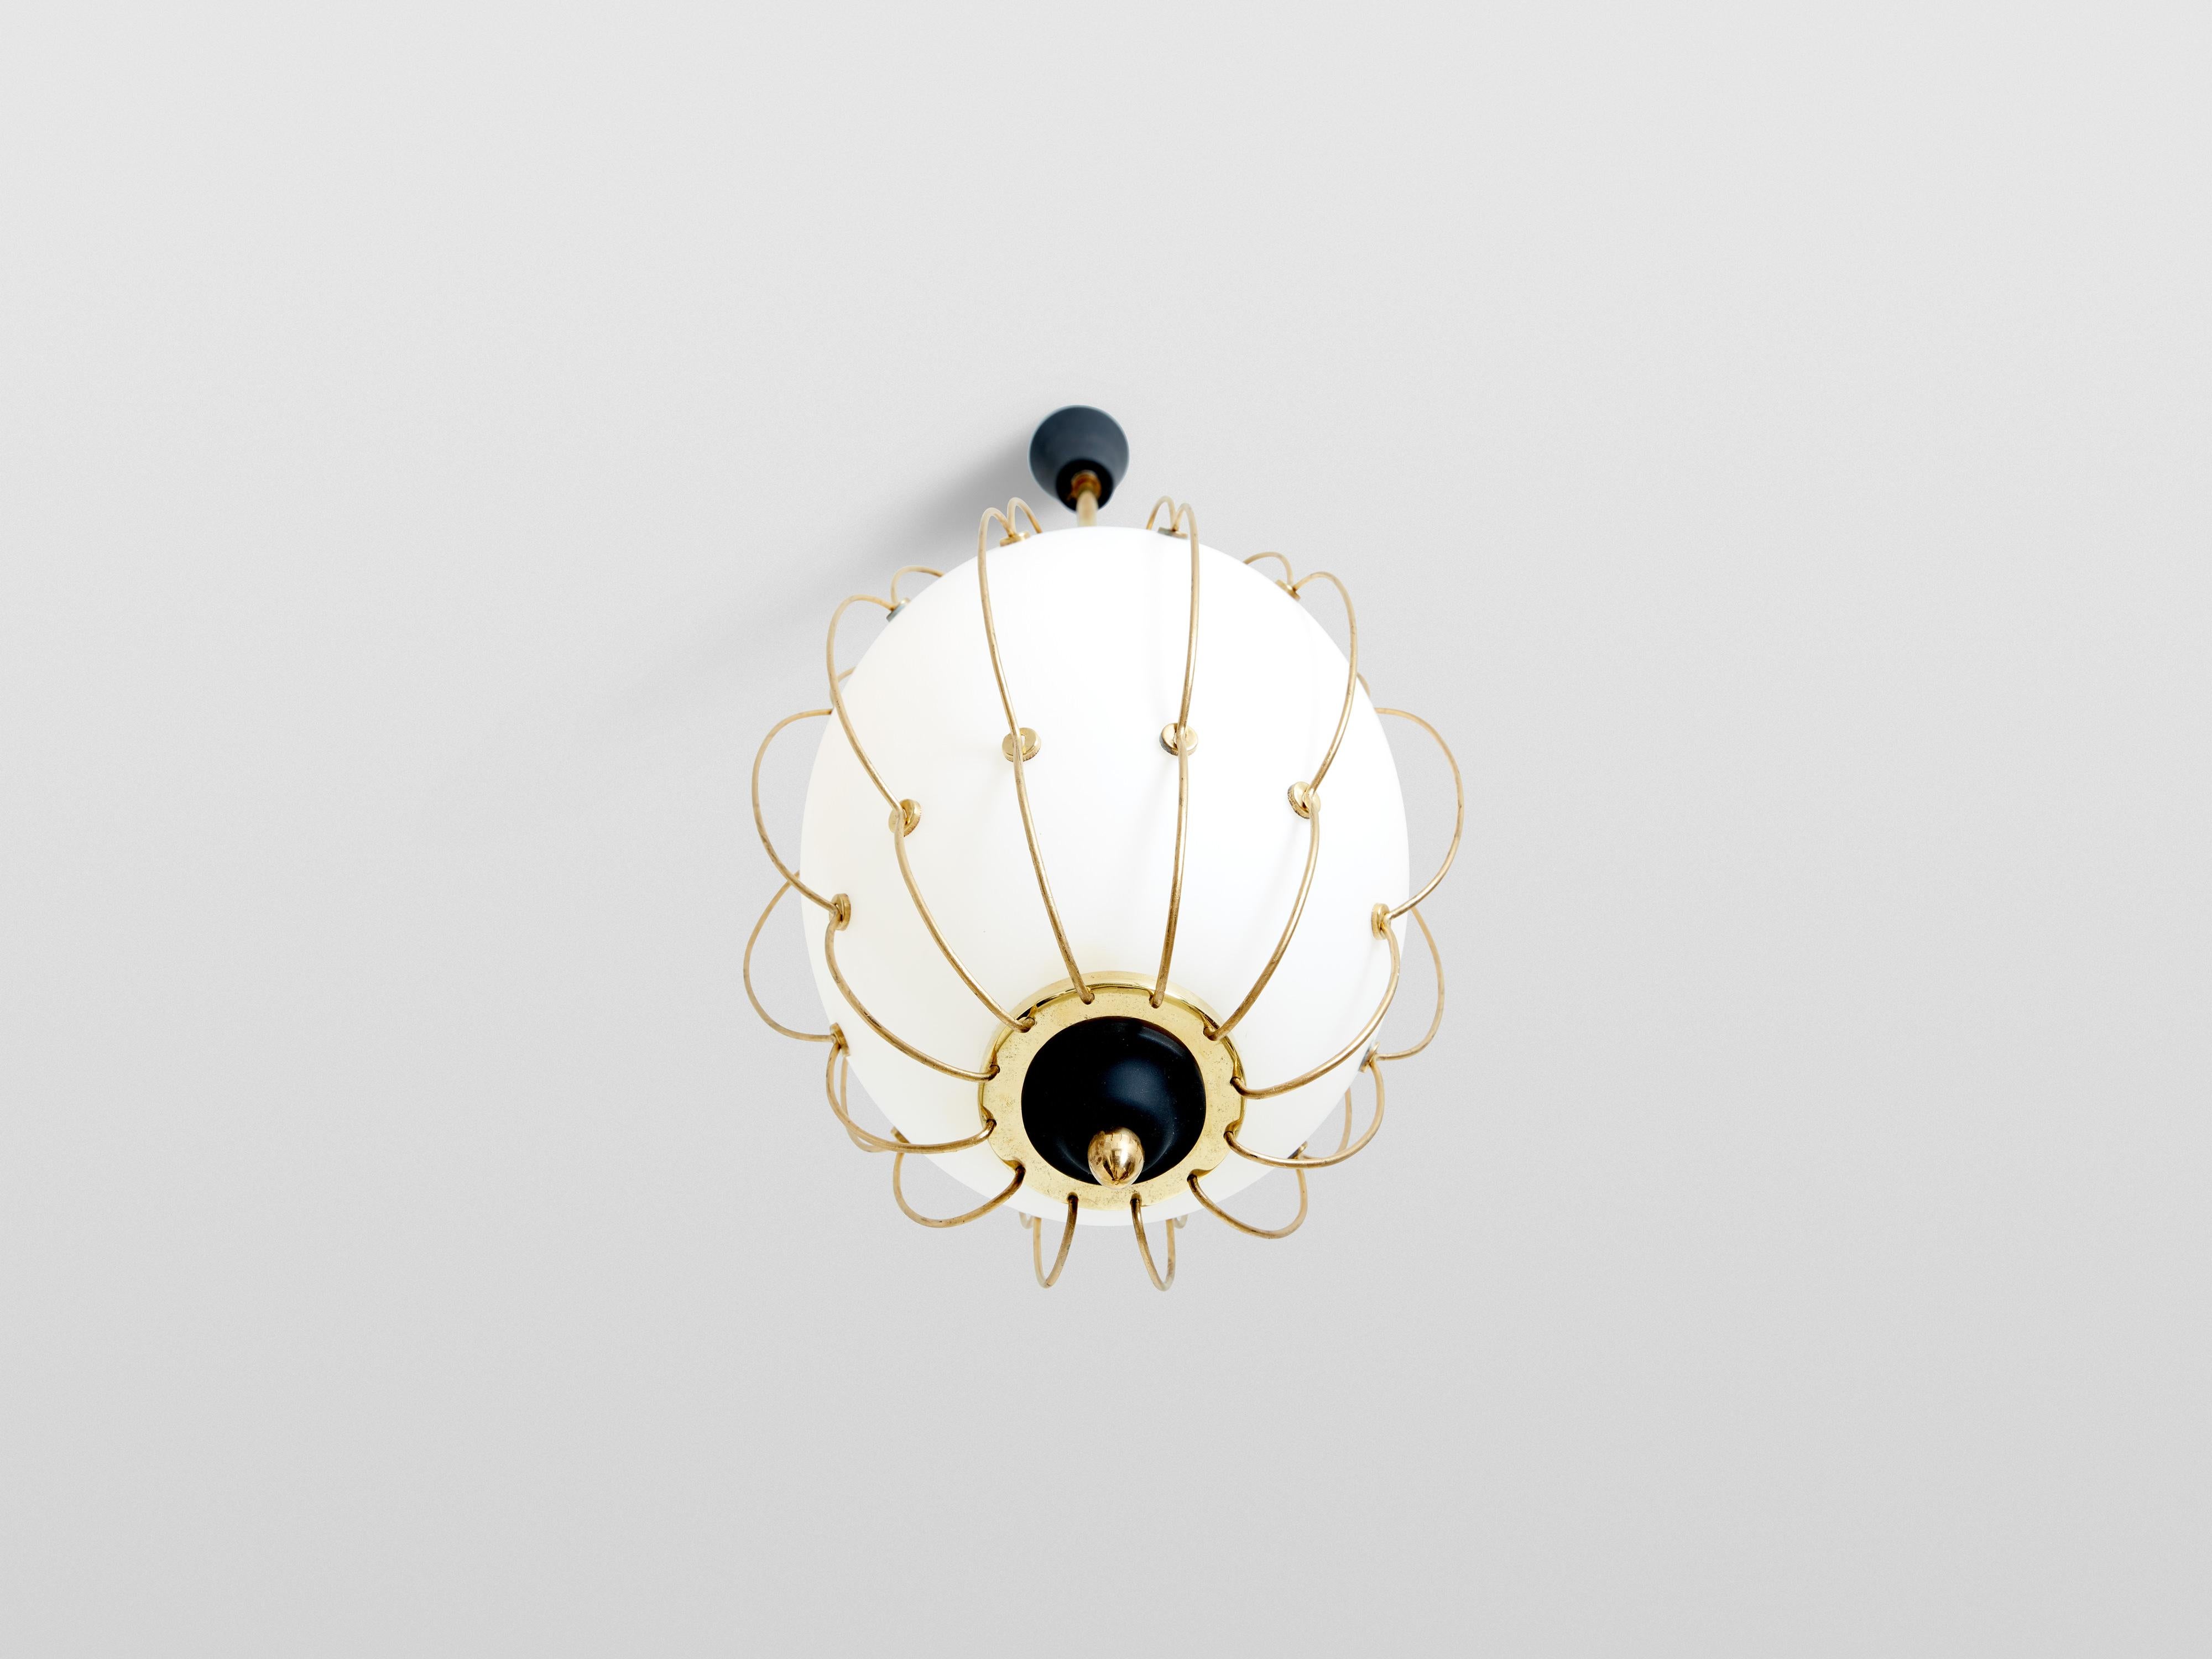 This white opaline glass, brass, and metal chandelier was designed by Angelo Lelii for Arredoluce in 1958. Featuring a meticulously crafted abstract structure made from curved brass rods surrounding the opaline glass shade, this luminaire is a